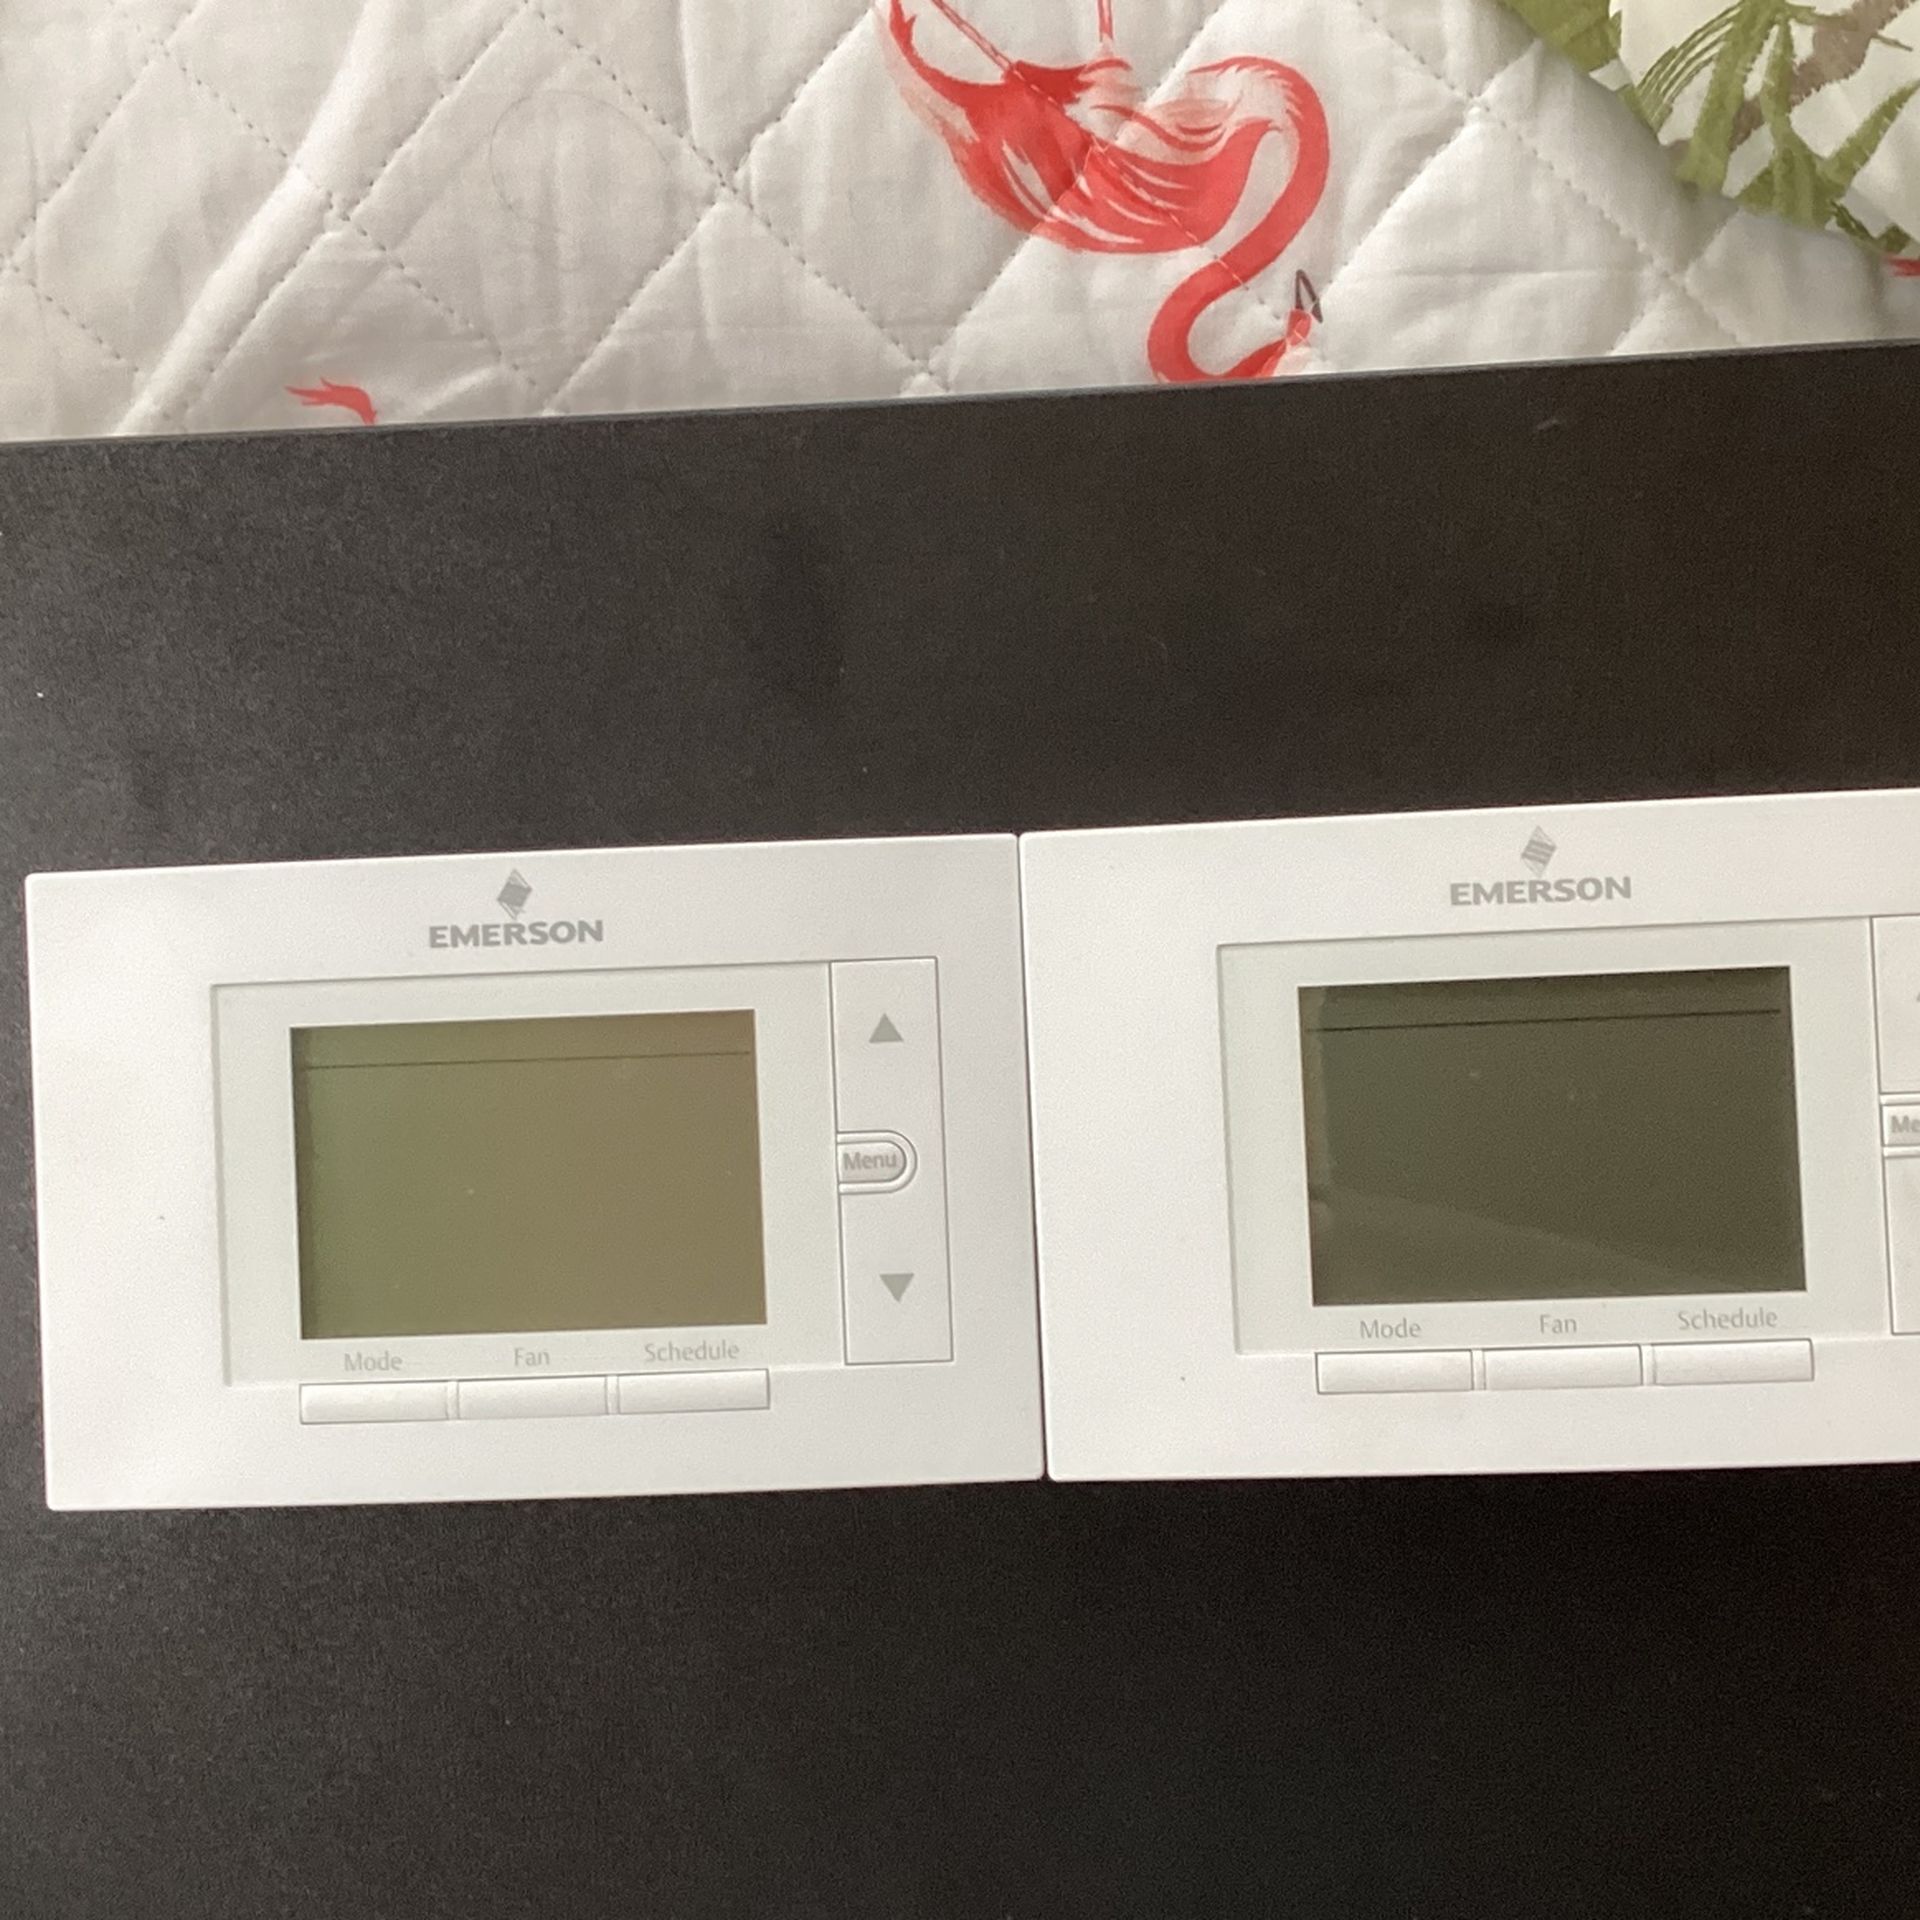 Sensi Wi-Fi Programmable Thermostat, Emerson SKU: 1F86U-42WF Two For $50 / Used Excellent Condition 